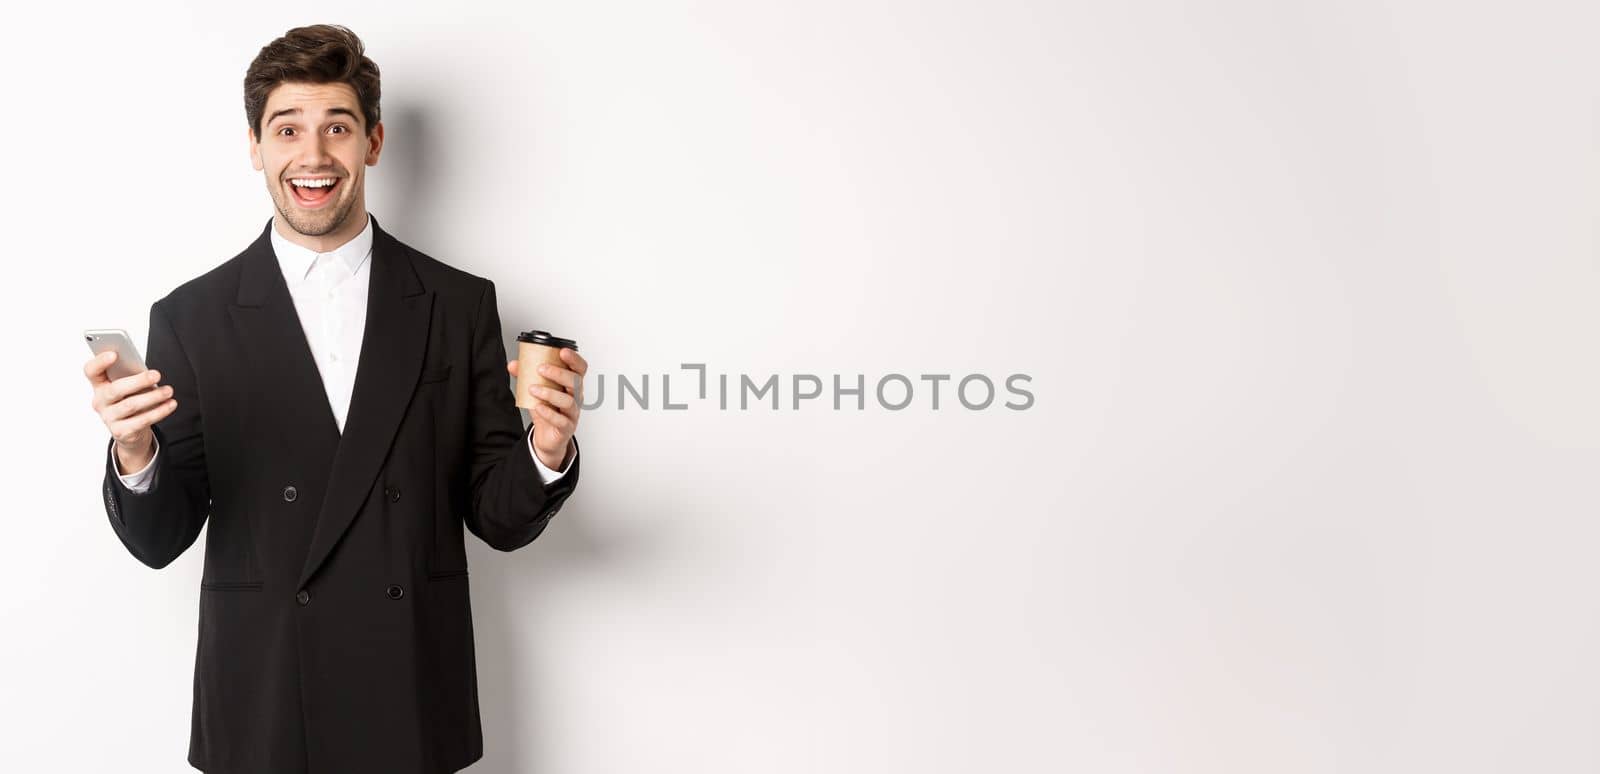 Portrait of happy good-looking man in suit, holding cup of coffee and smartphone, achieve app goal, standing over white background.